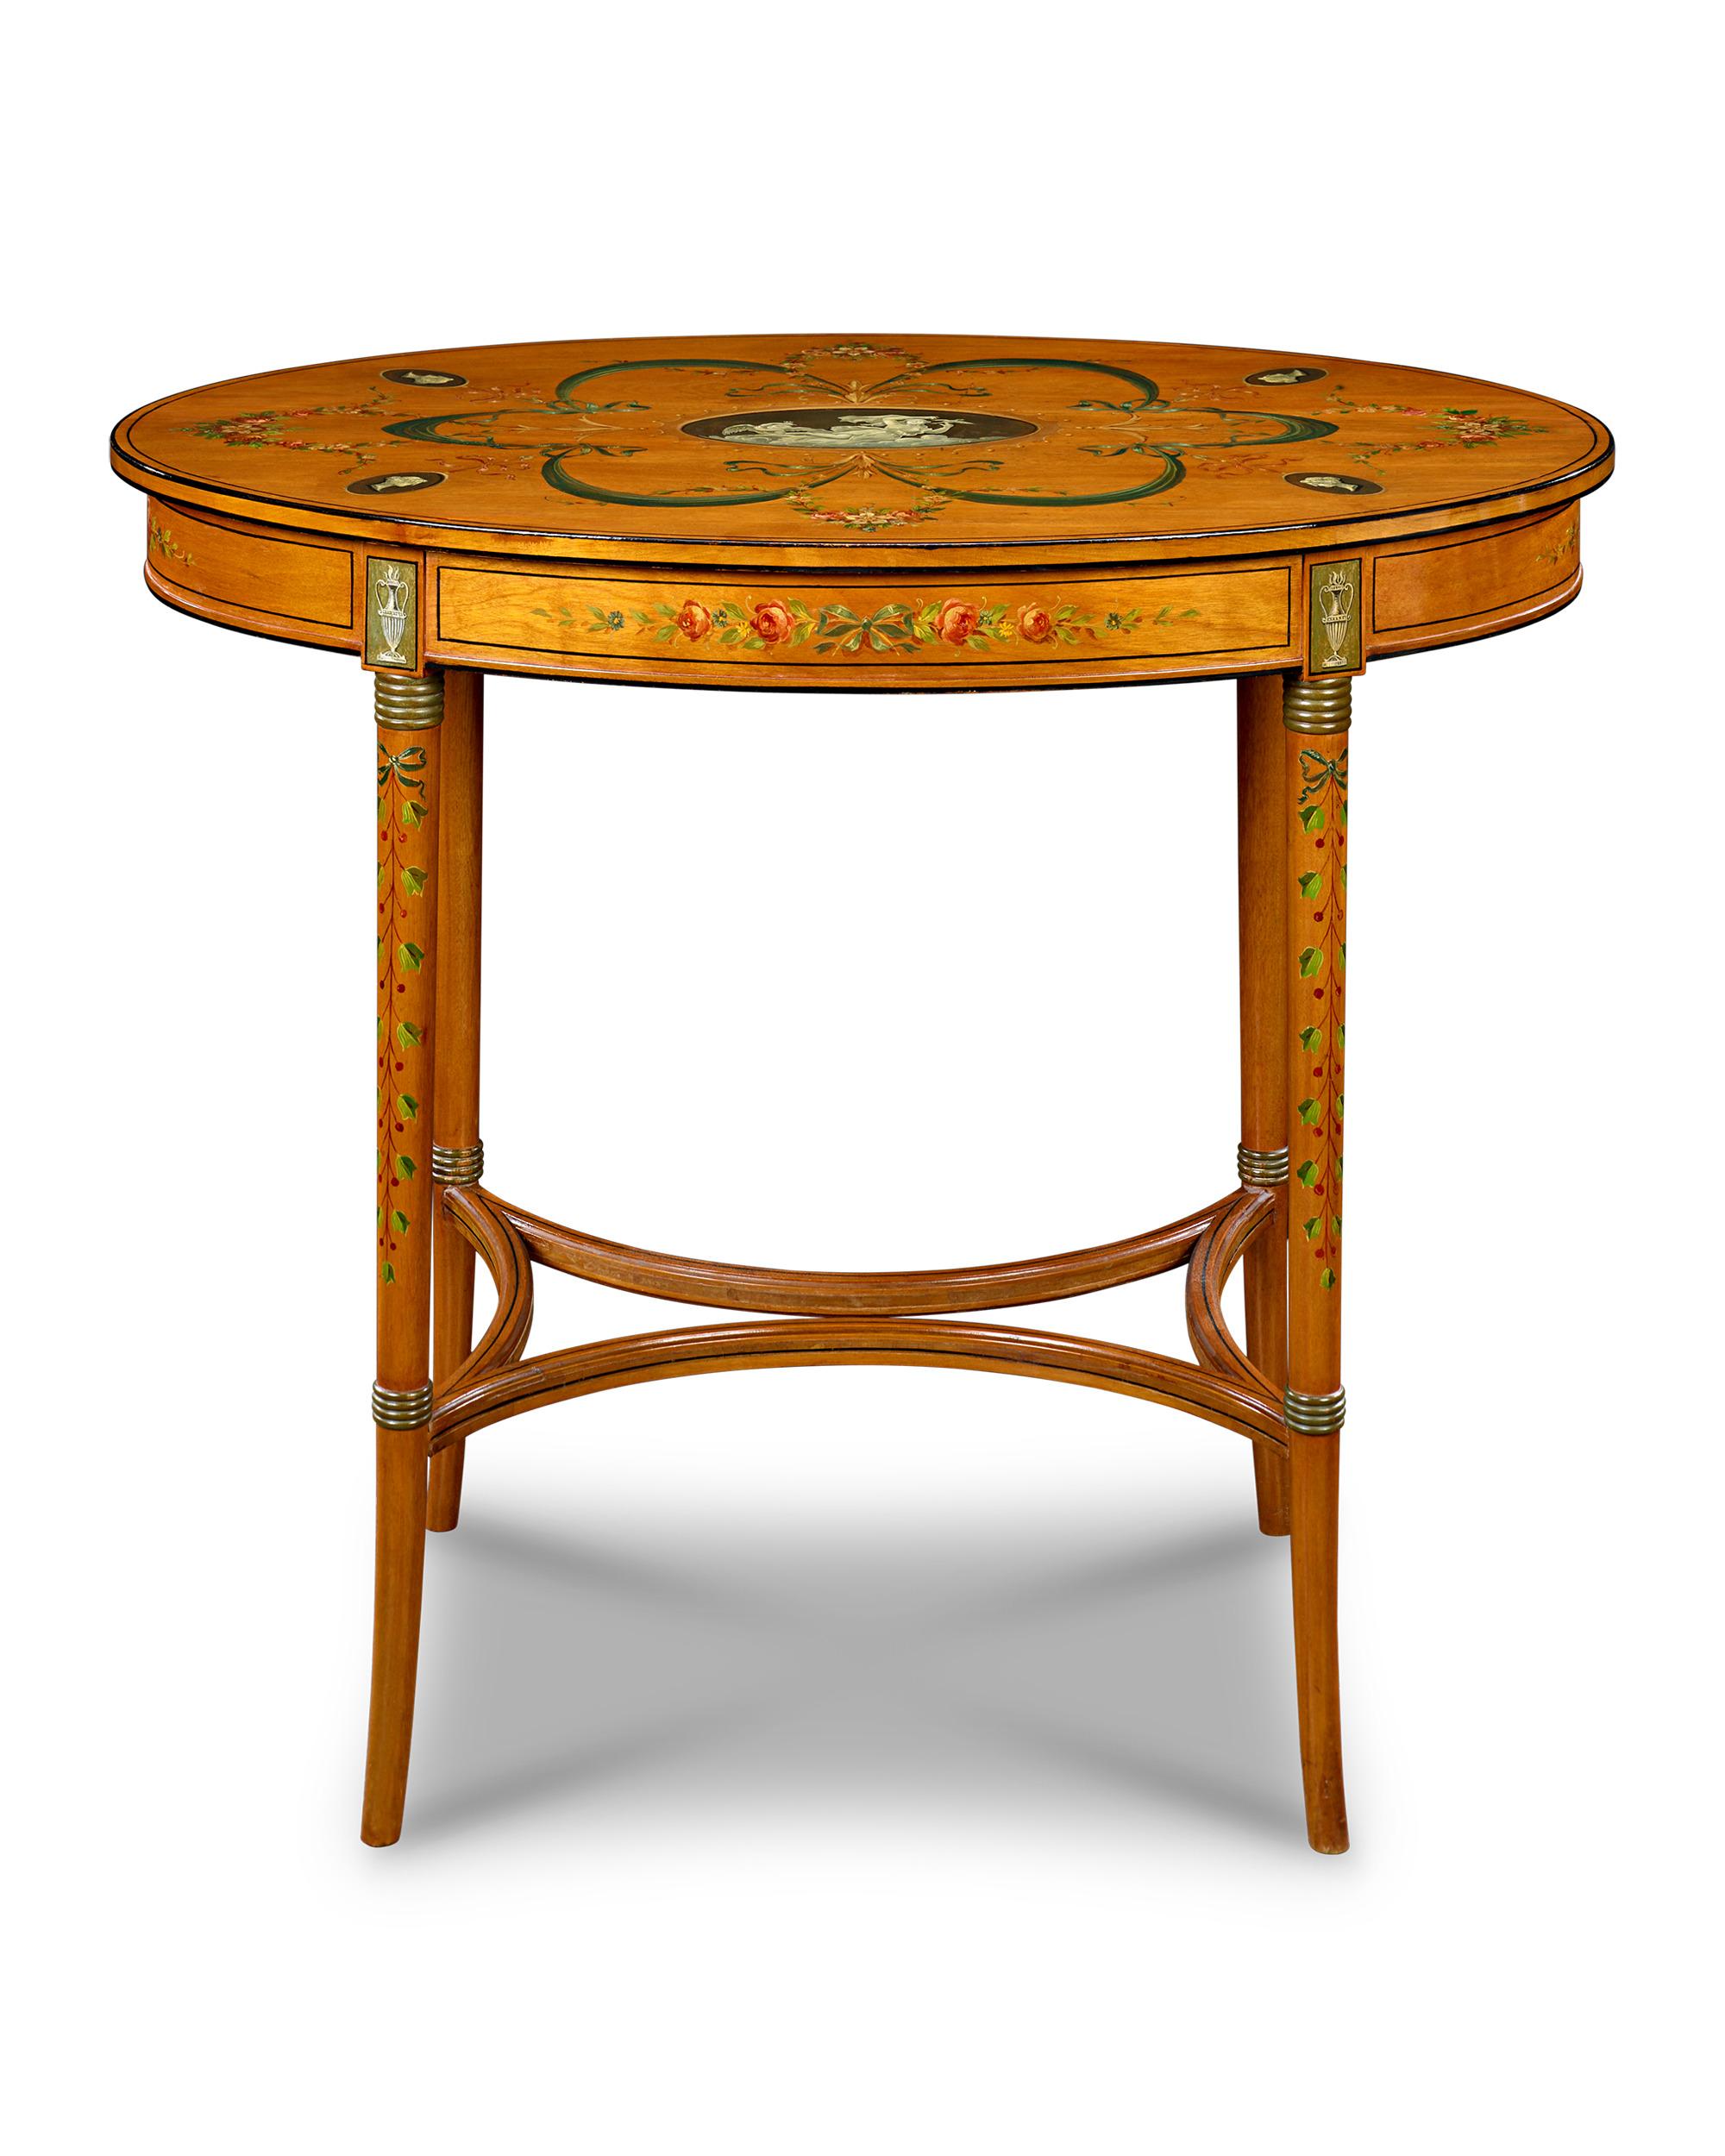 Hand-Painted English Satinwood Parlor Tables For Sale